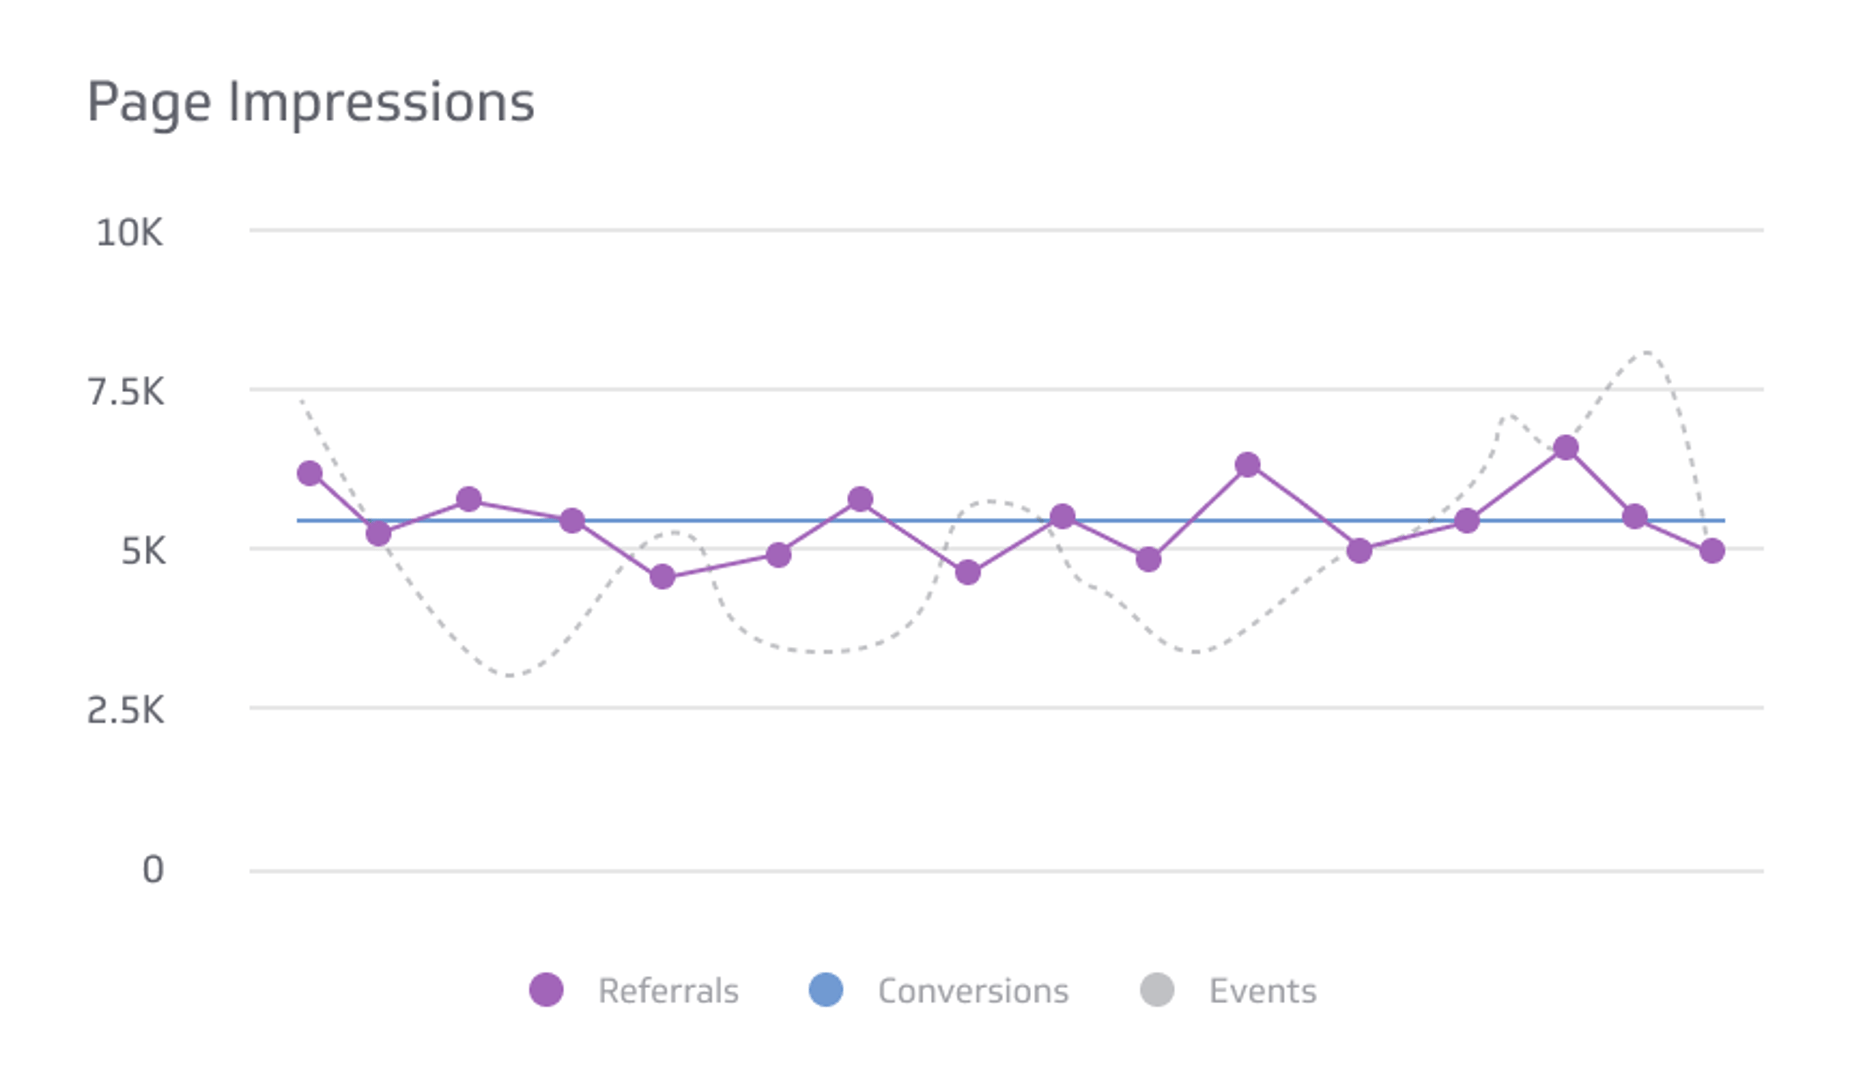 Related KPI Examples - Facebook Engagement Metric